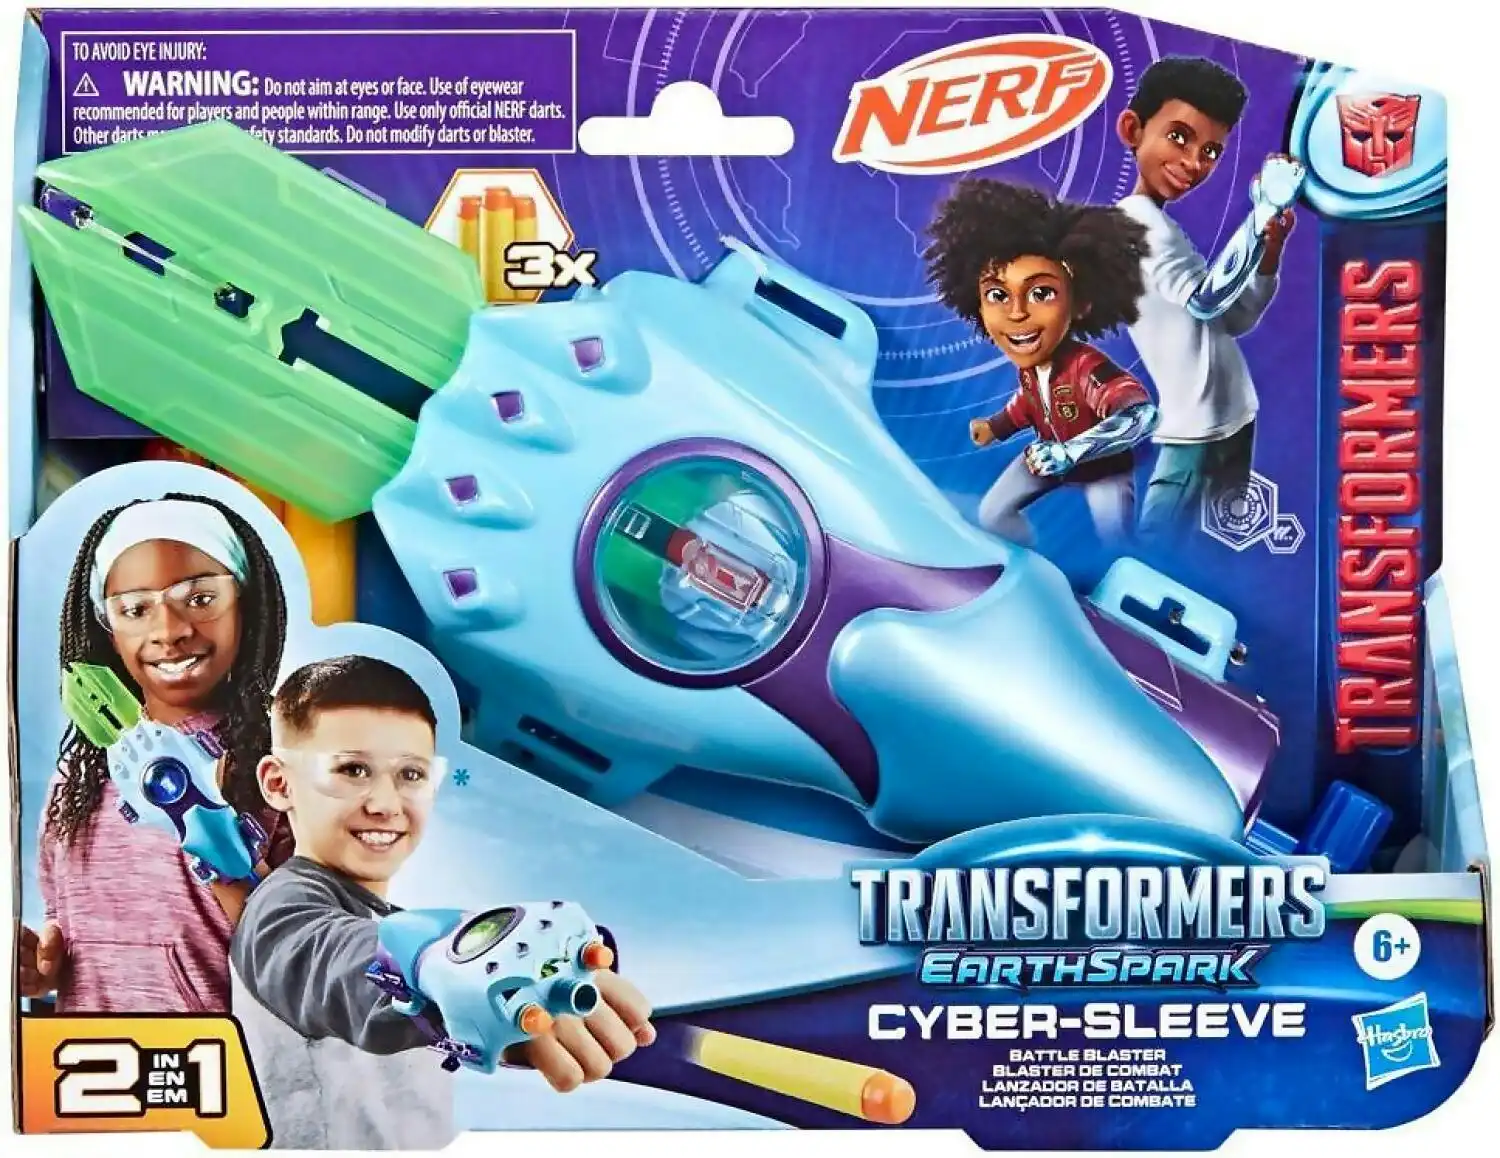 Nerf - Transformers Earthspark Cyber-sleeve Battle Blaster Toy Interactive Toys For 6+ - Hasbro